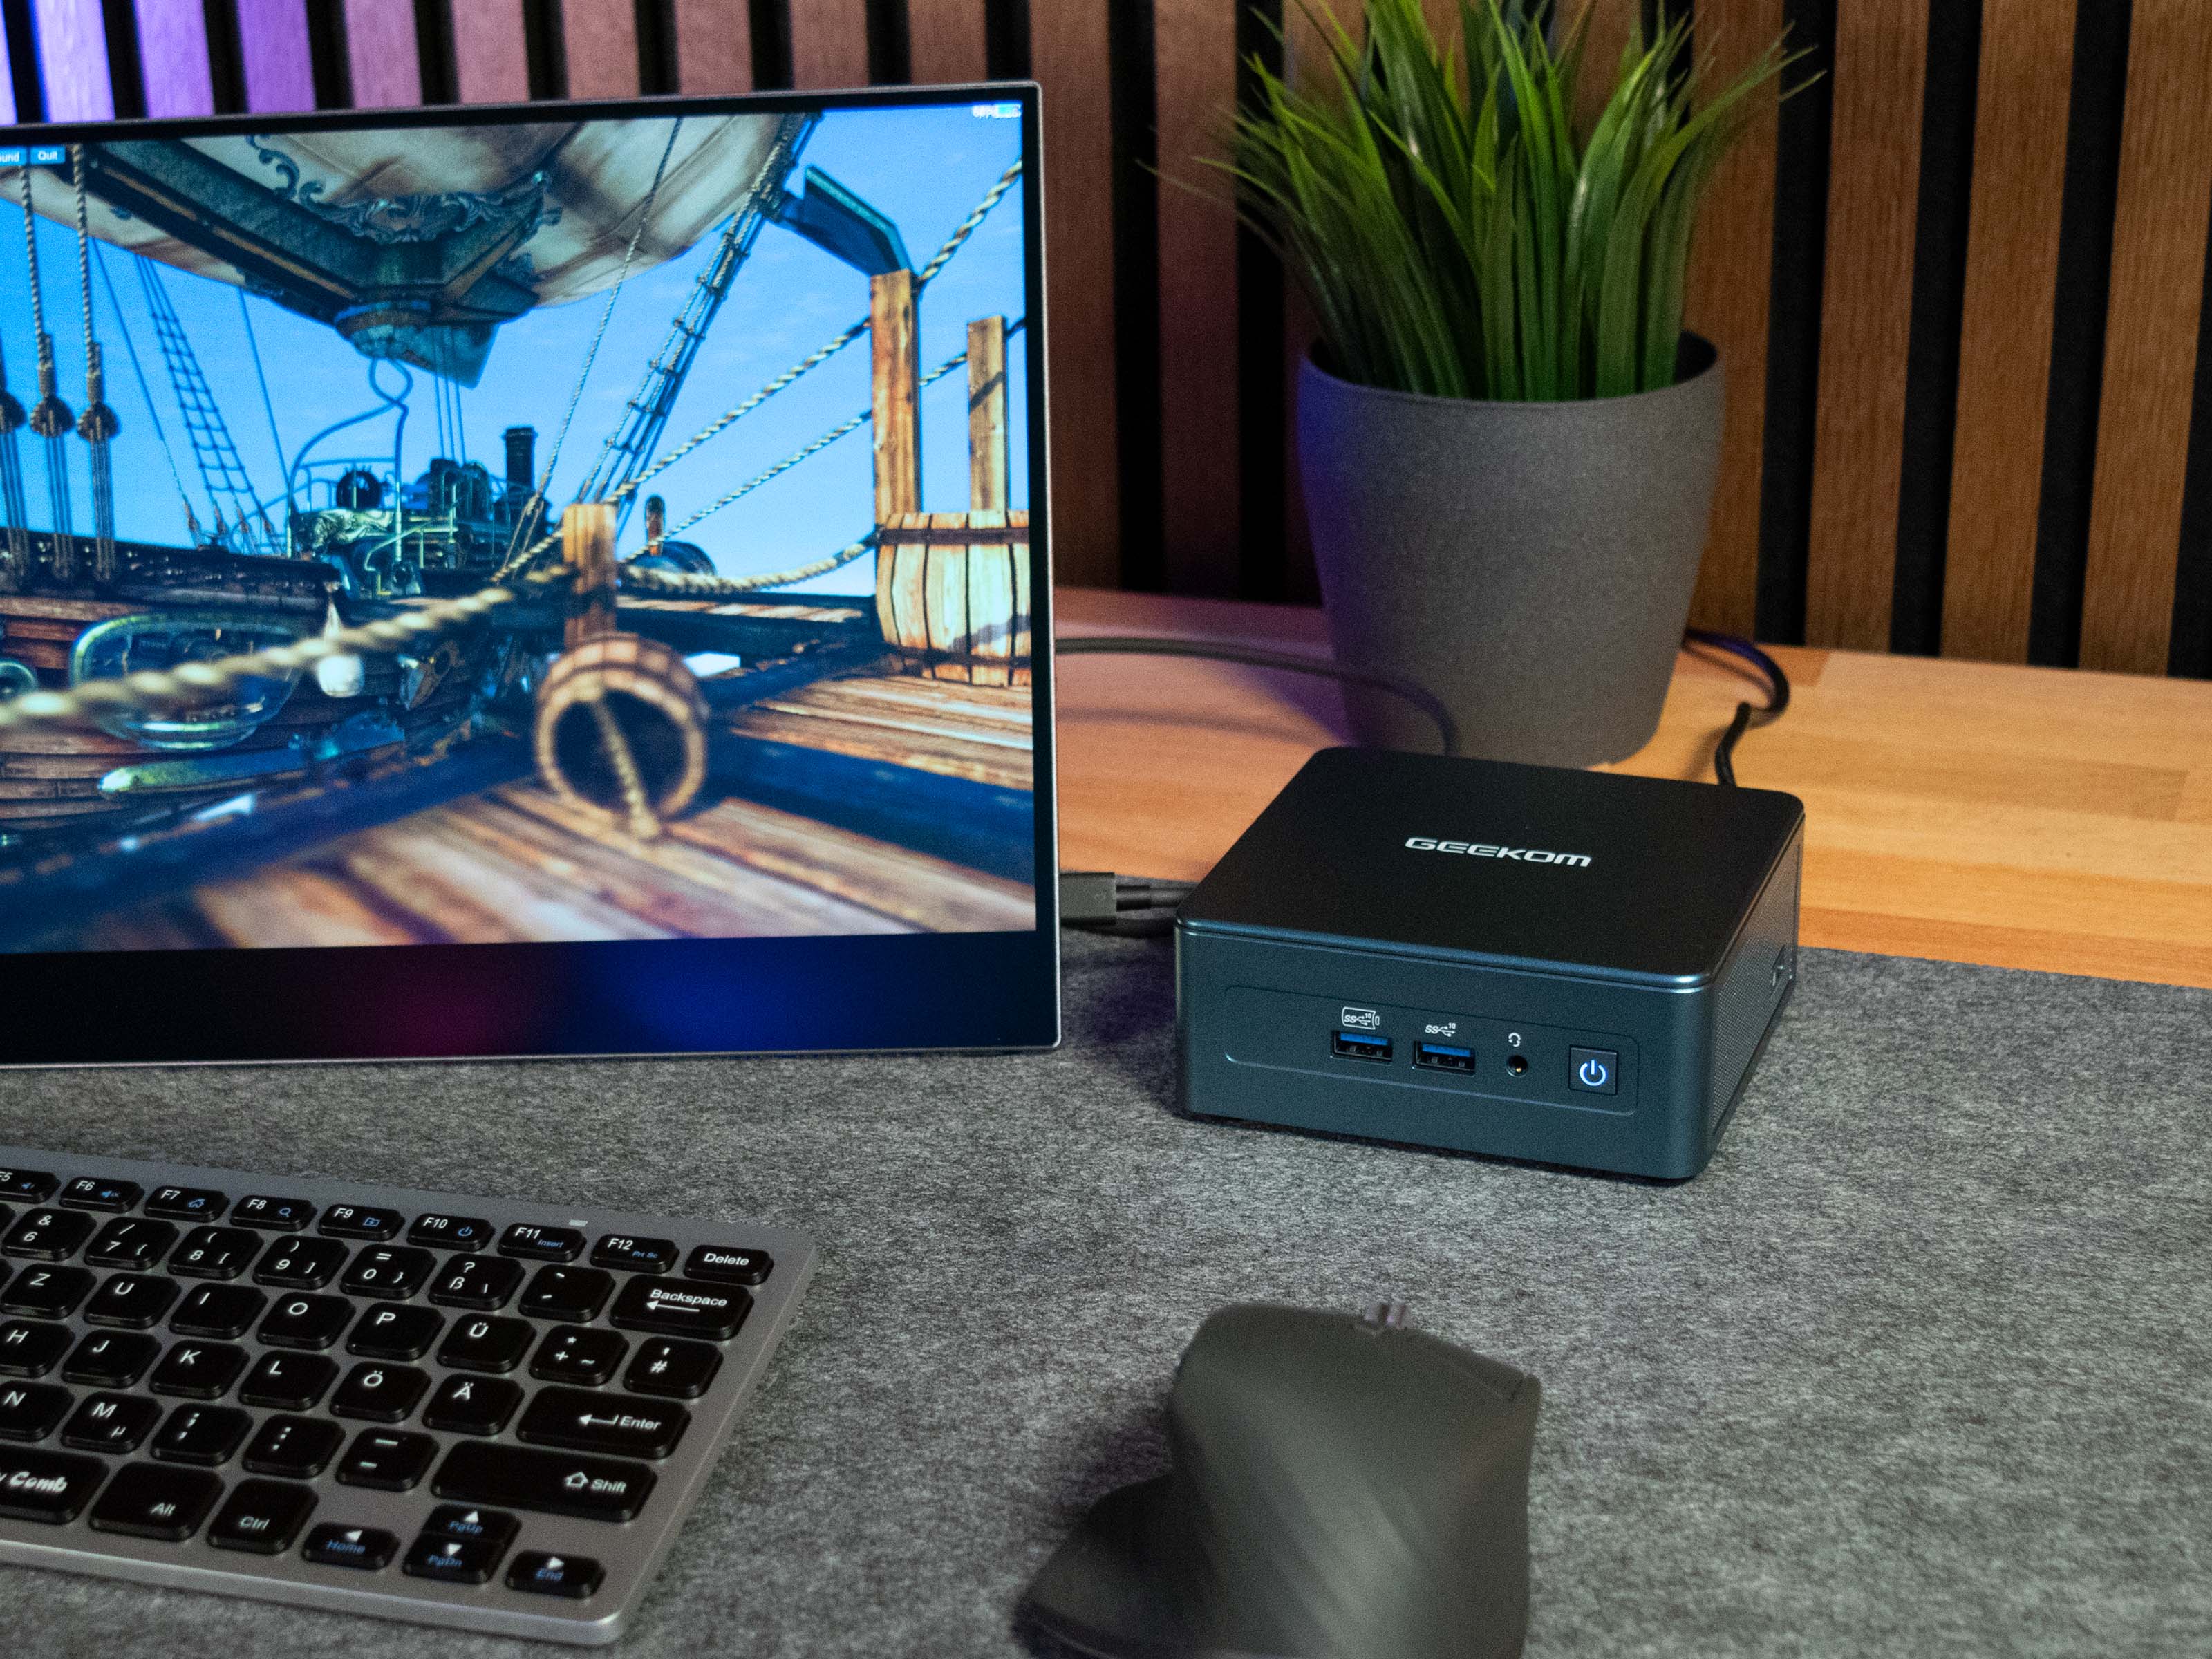 GEEKOM IT12 mini PC Review: Another Compact Beast From Geekom 